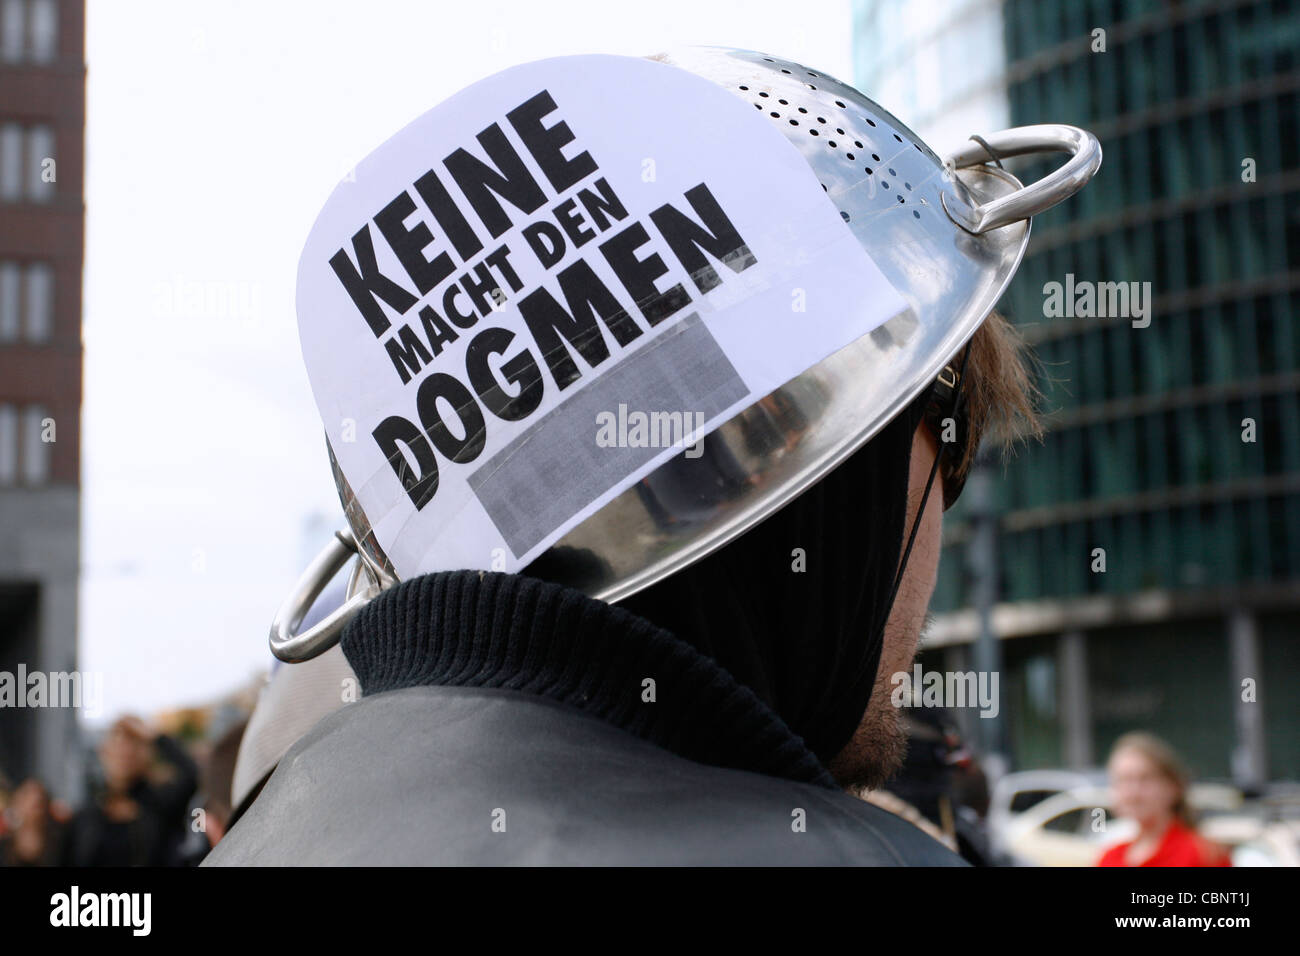 'No power to the dogmas' is written the creative hat of a protester against the visit of Pope Benedict XVI in Berlin, Germany. Stock Photo